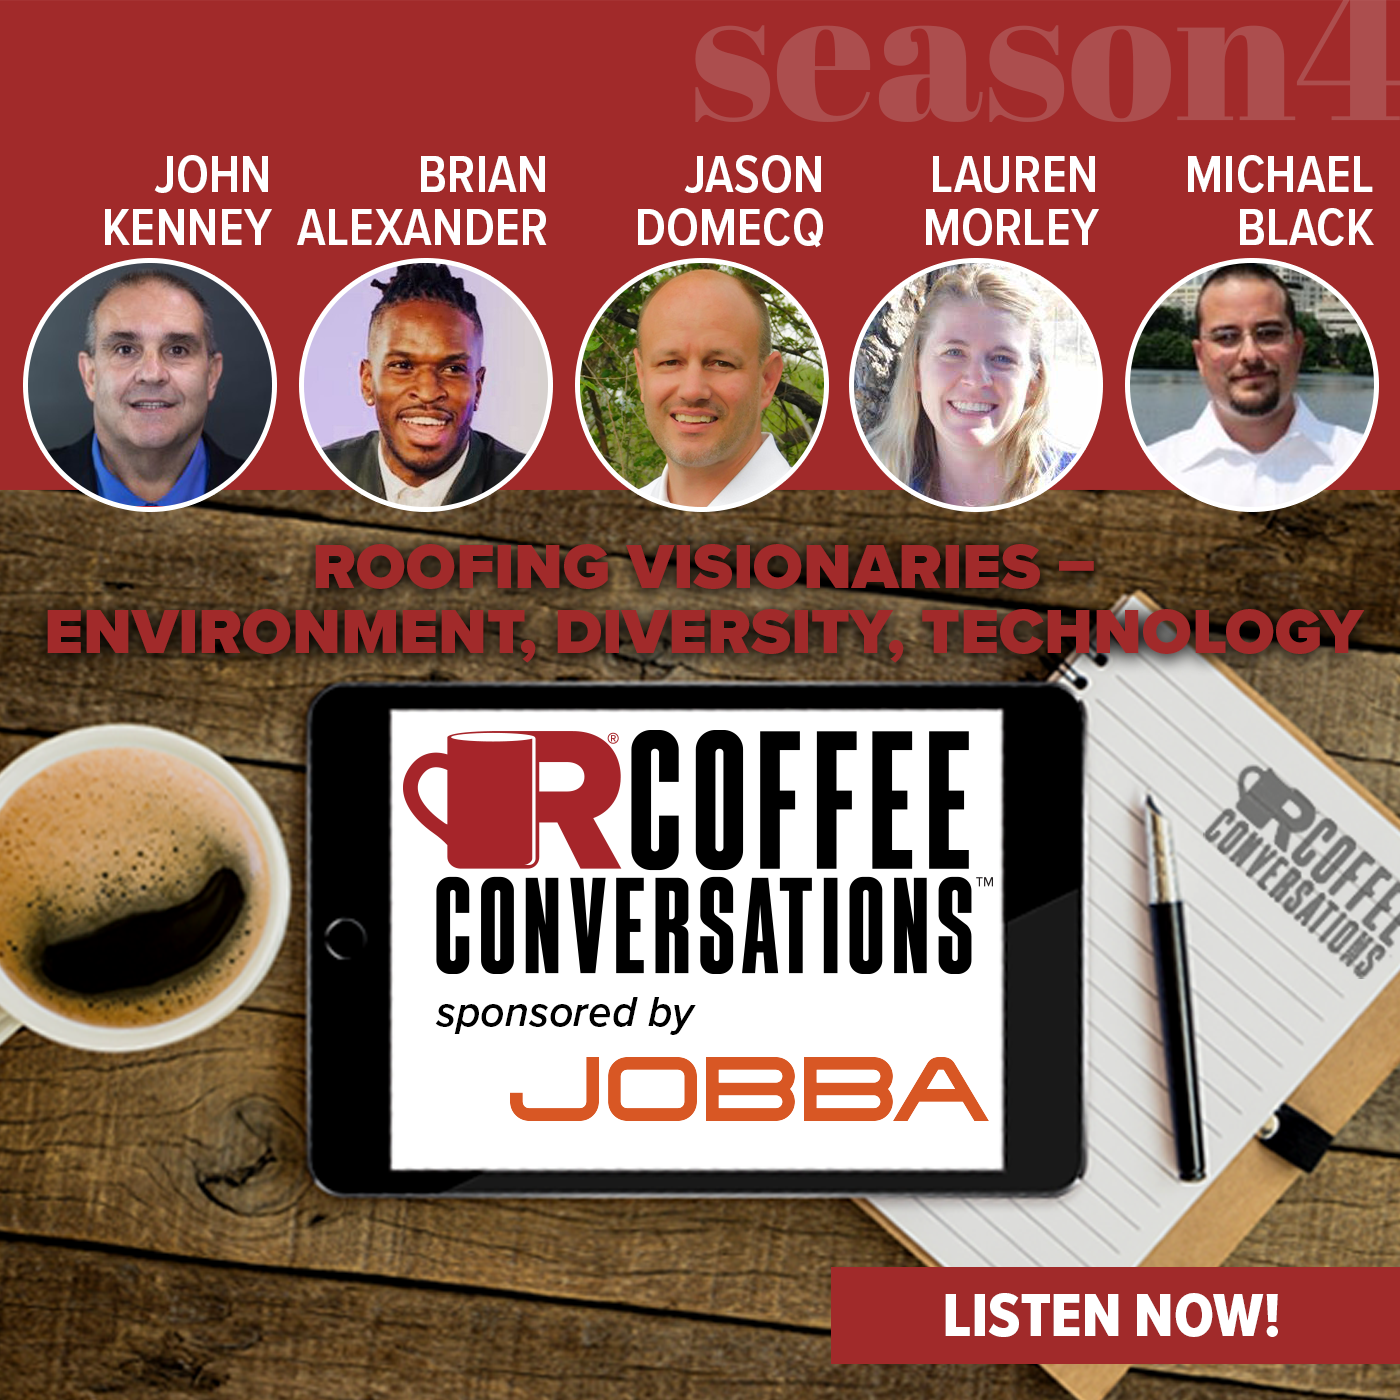 Jobba - Coffee Conversations - Roofing Visionaries – Environment, Diversity, Technology (Podcast_